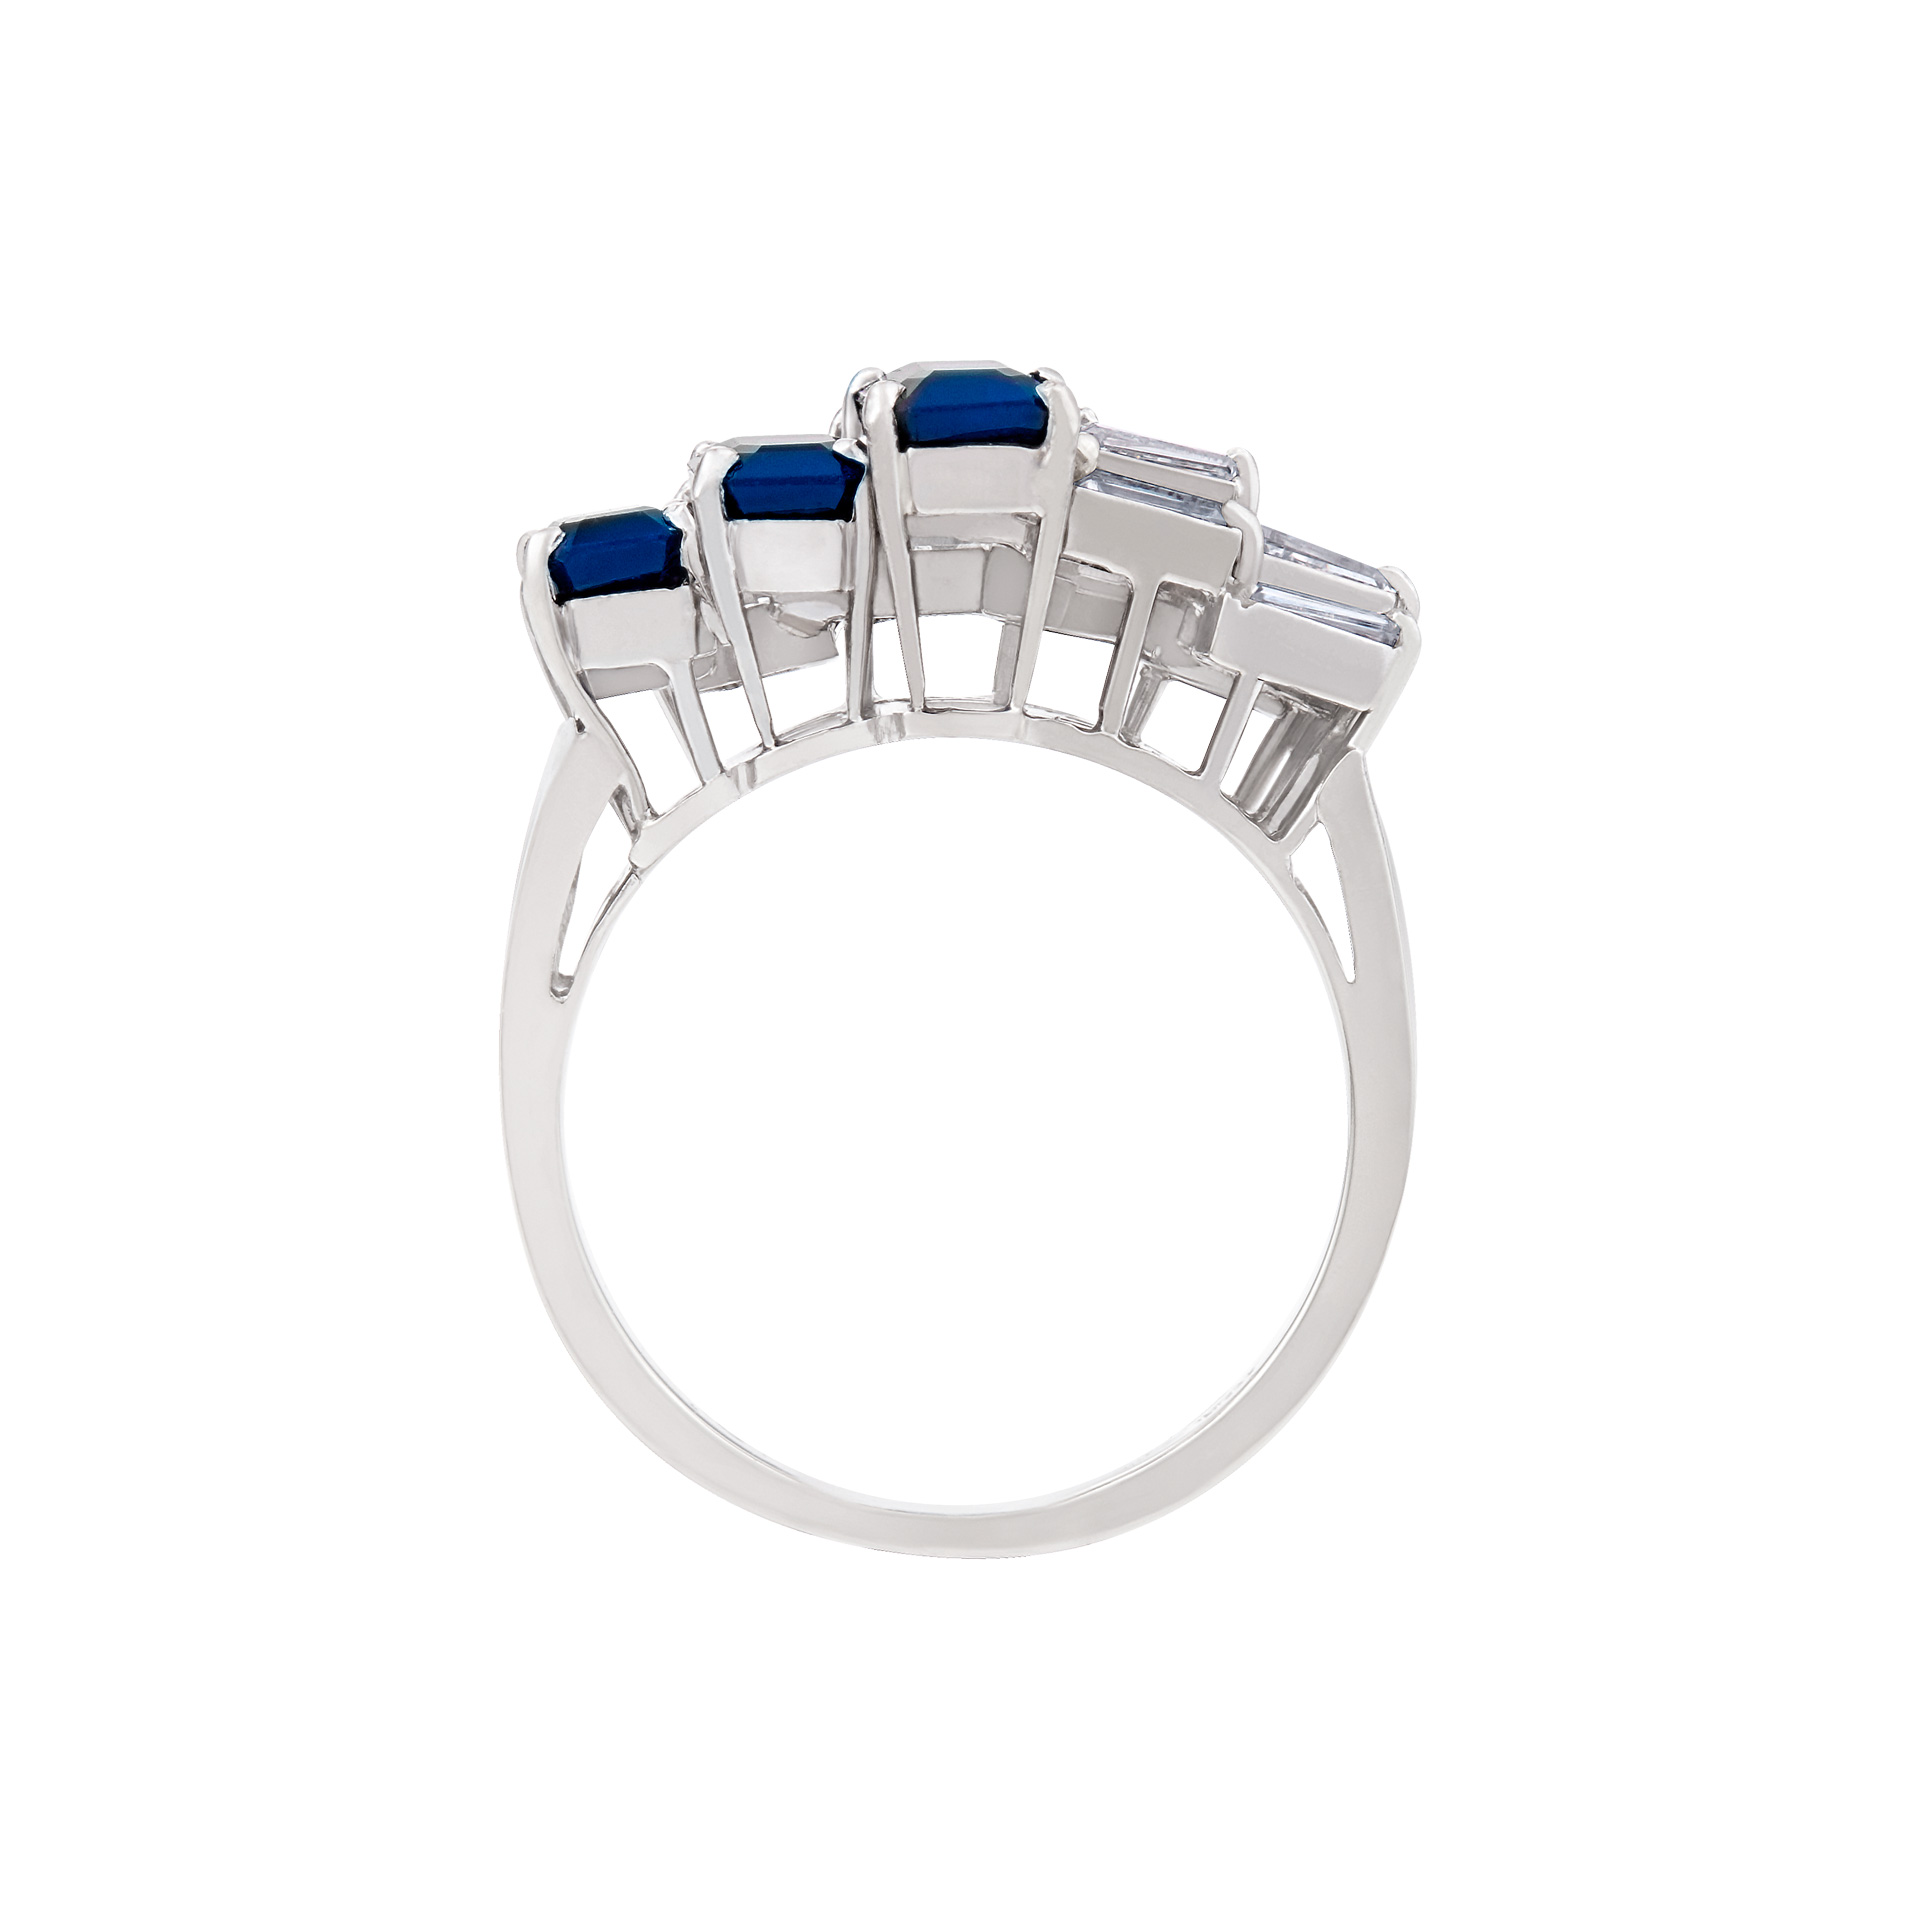 Diamond and sapphire ring in 18k white gold. 1.50 carats in diamonds. Size 5 image 2